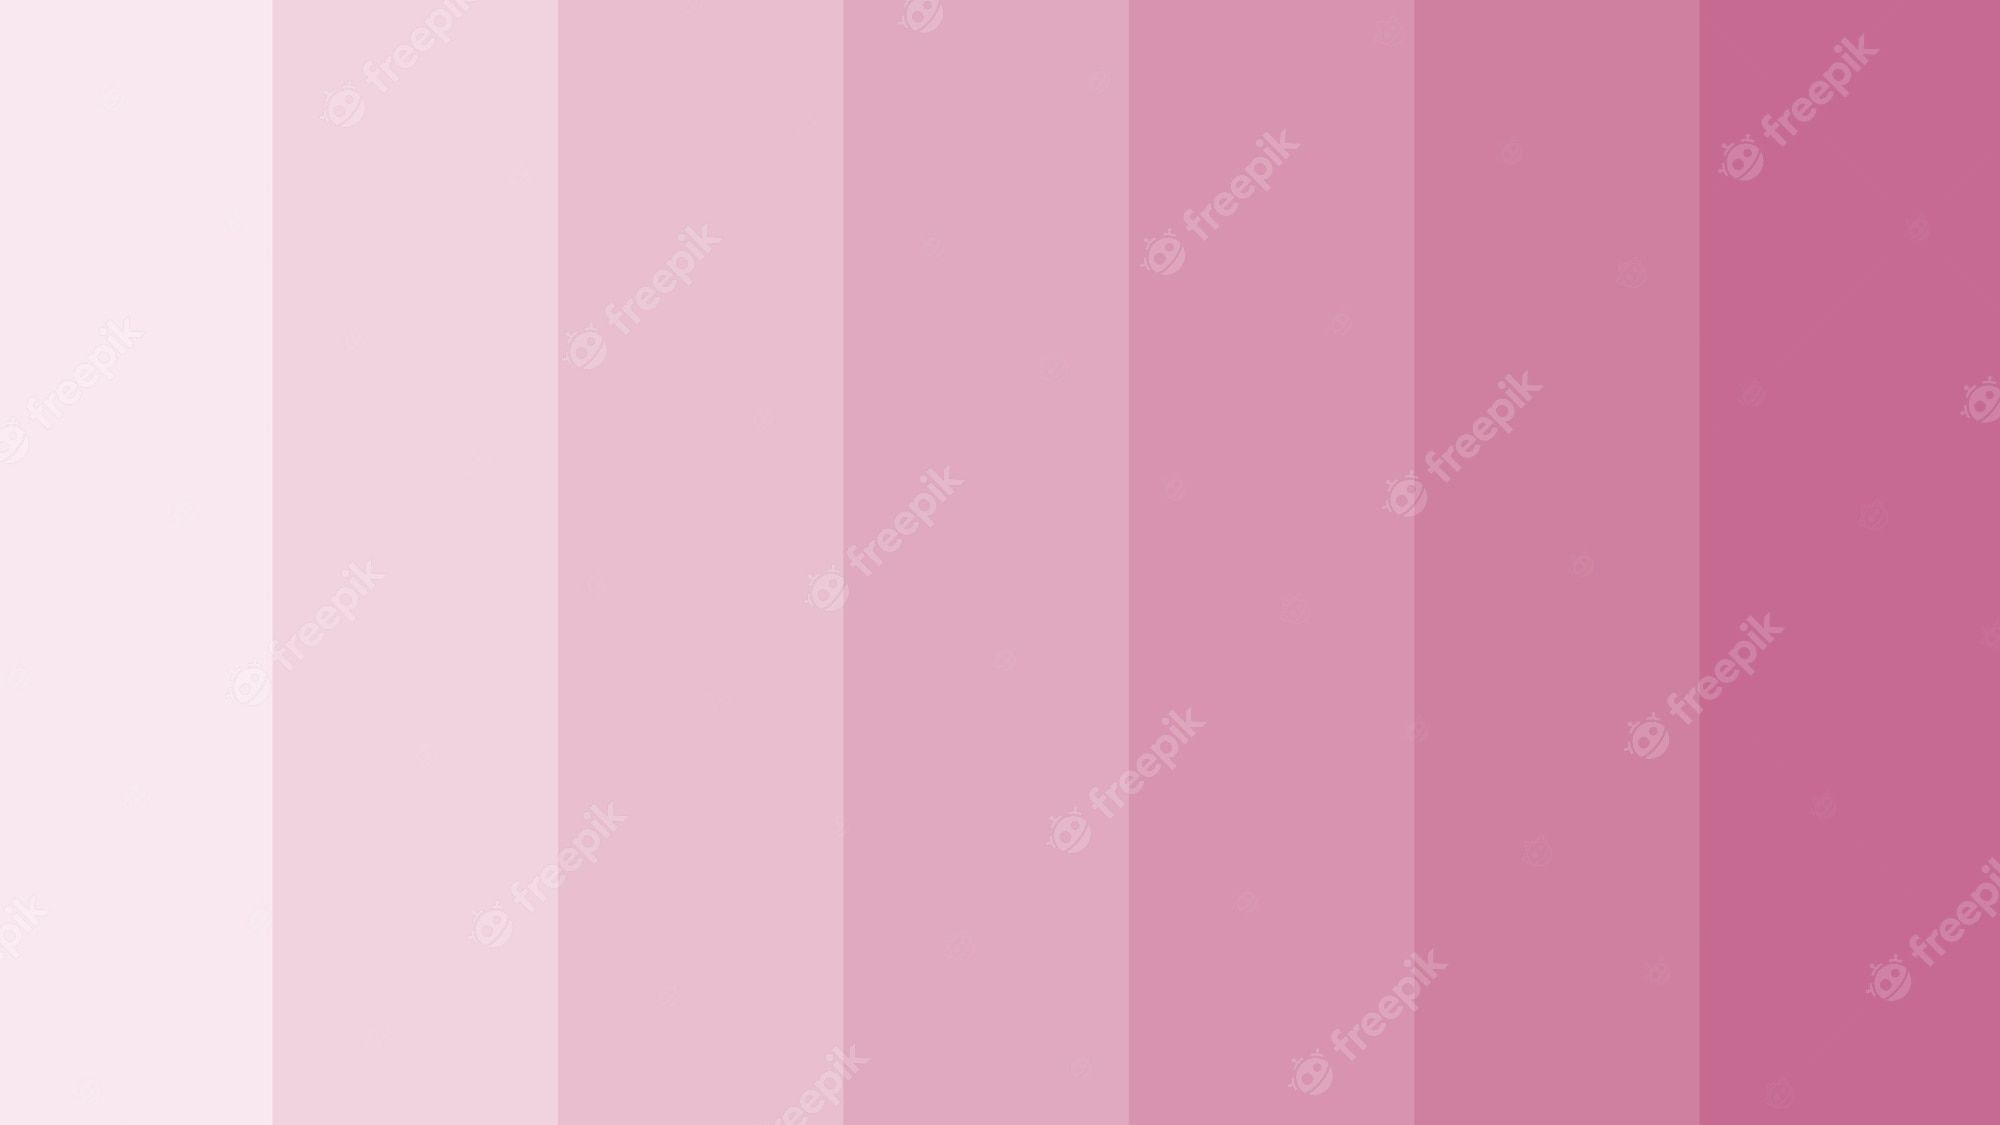 Pink gradient background with white stripes - Light pink